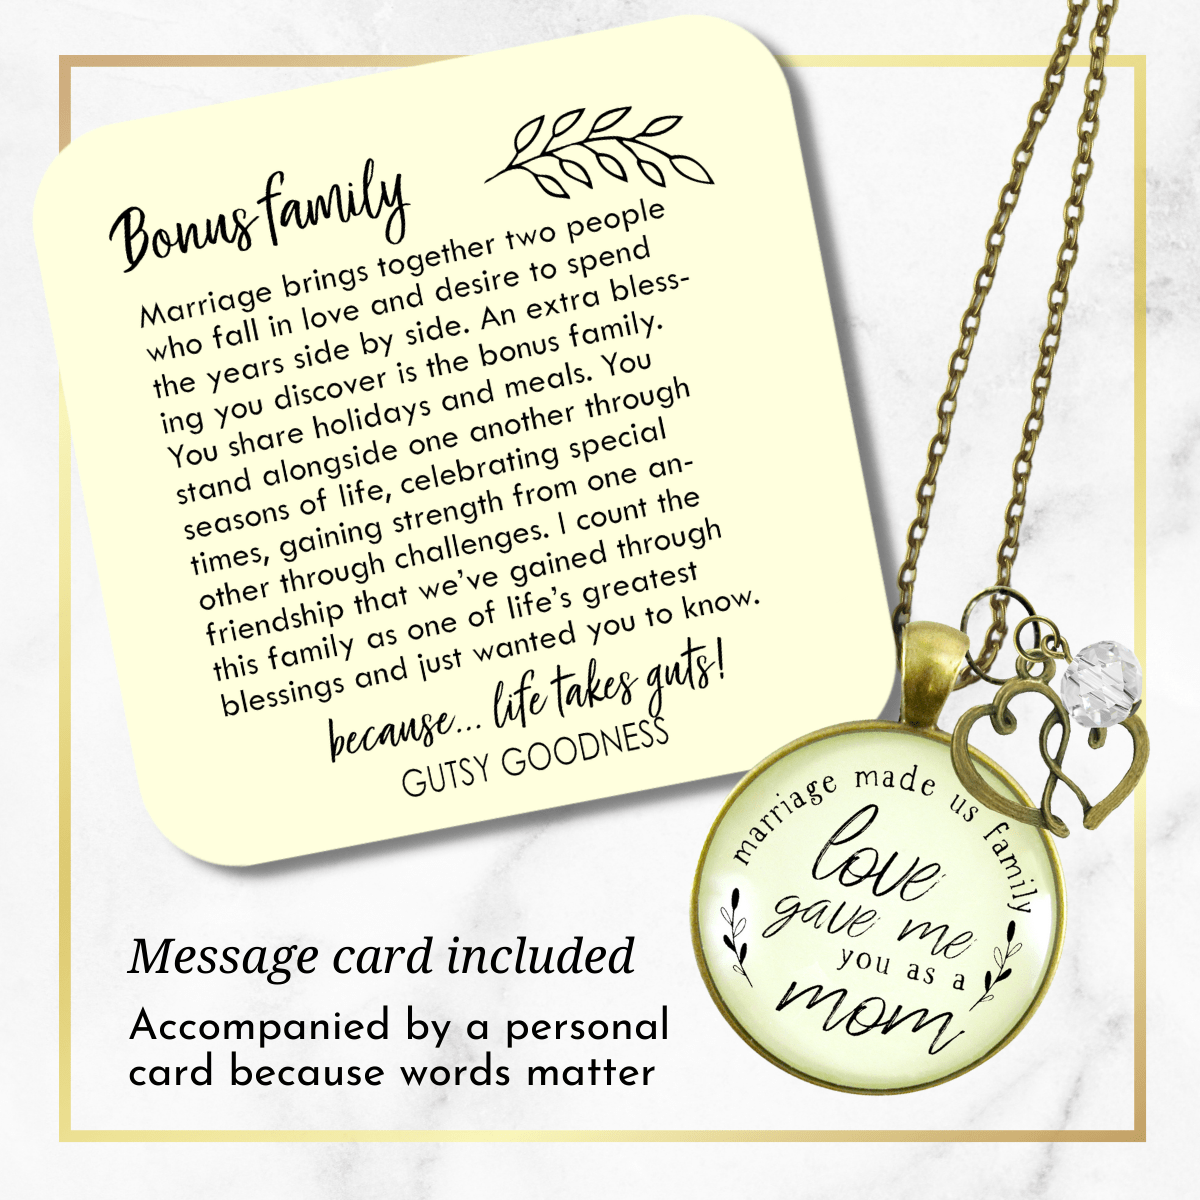 Gutsy Goodness Mother in Law Necklace Blended Family Step Mom Gift Wedding Jewelry - Gutsy Goodness Handmade Jewelry;Mother In Law Necklace Blended Family Step Mom Gift Wedding Jewelry - Gutsy Goodness Handmade Jewelry Gifts